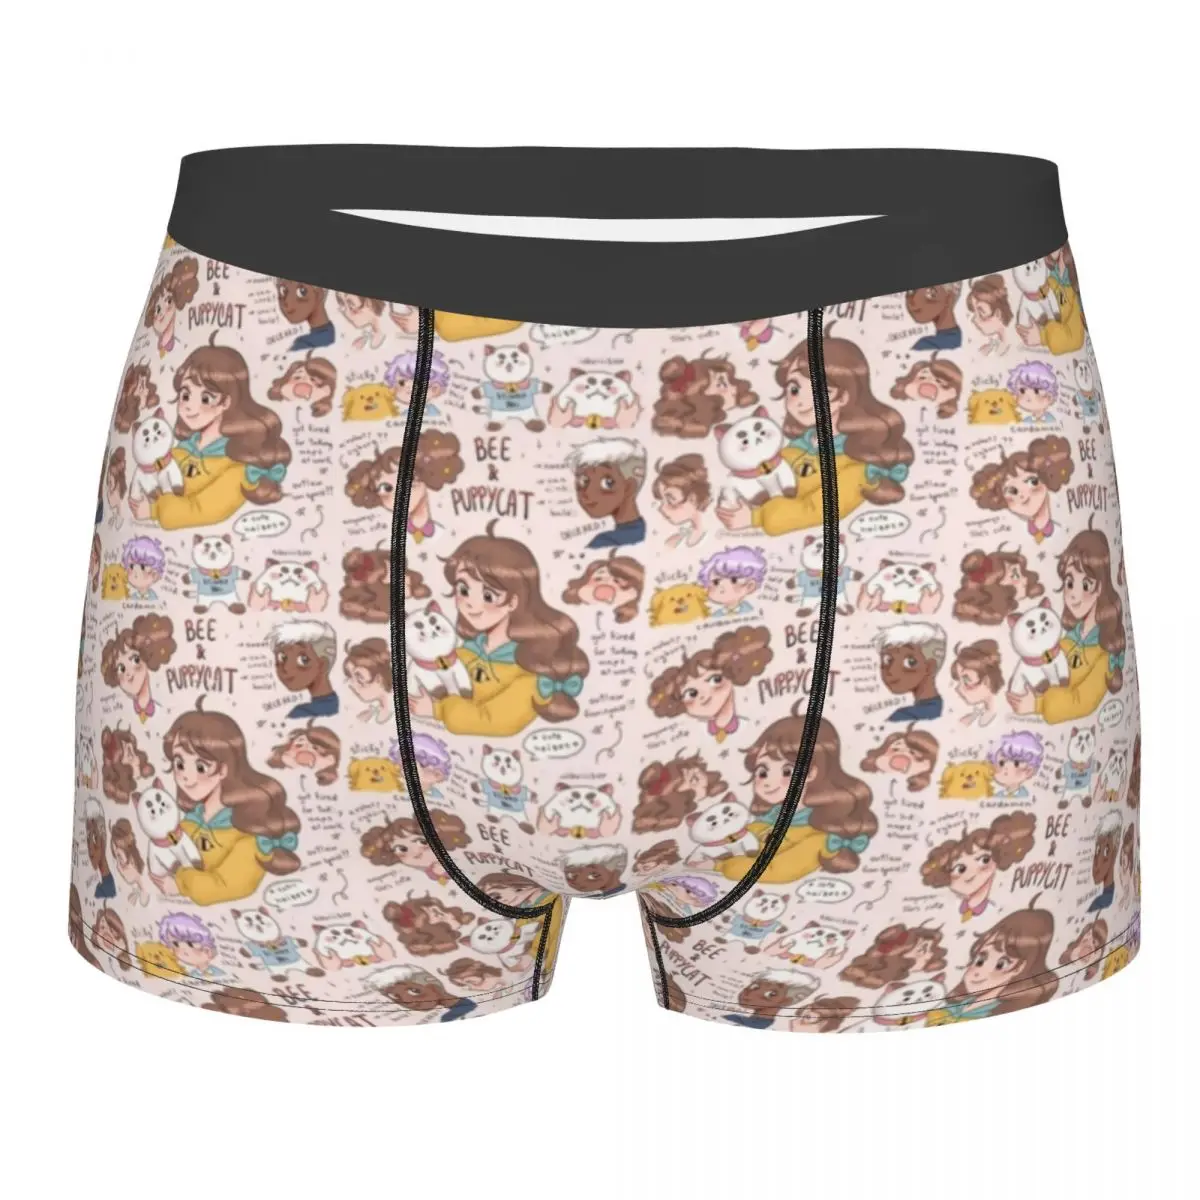 

Novelty Boxer Shorts Panties Briefs Men Bee And Puppycat Cute Cartoon Underwear Mid Waist Underpants for Male